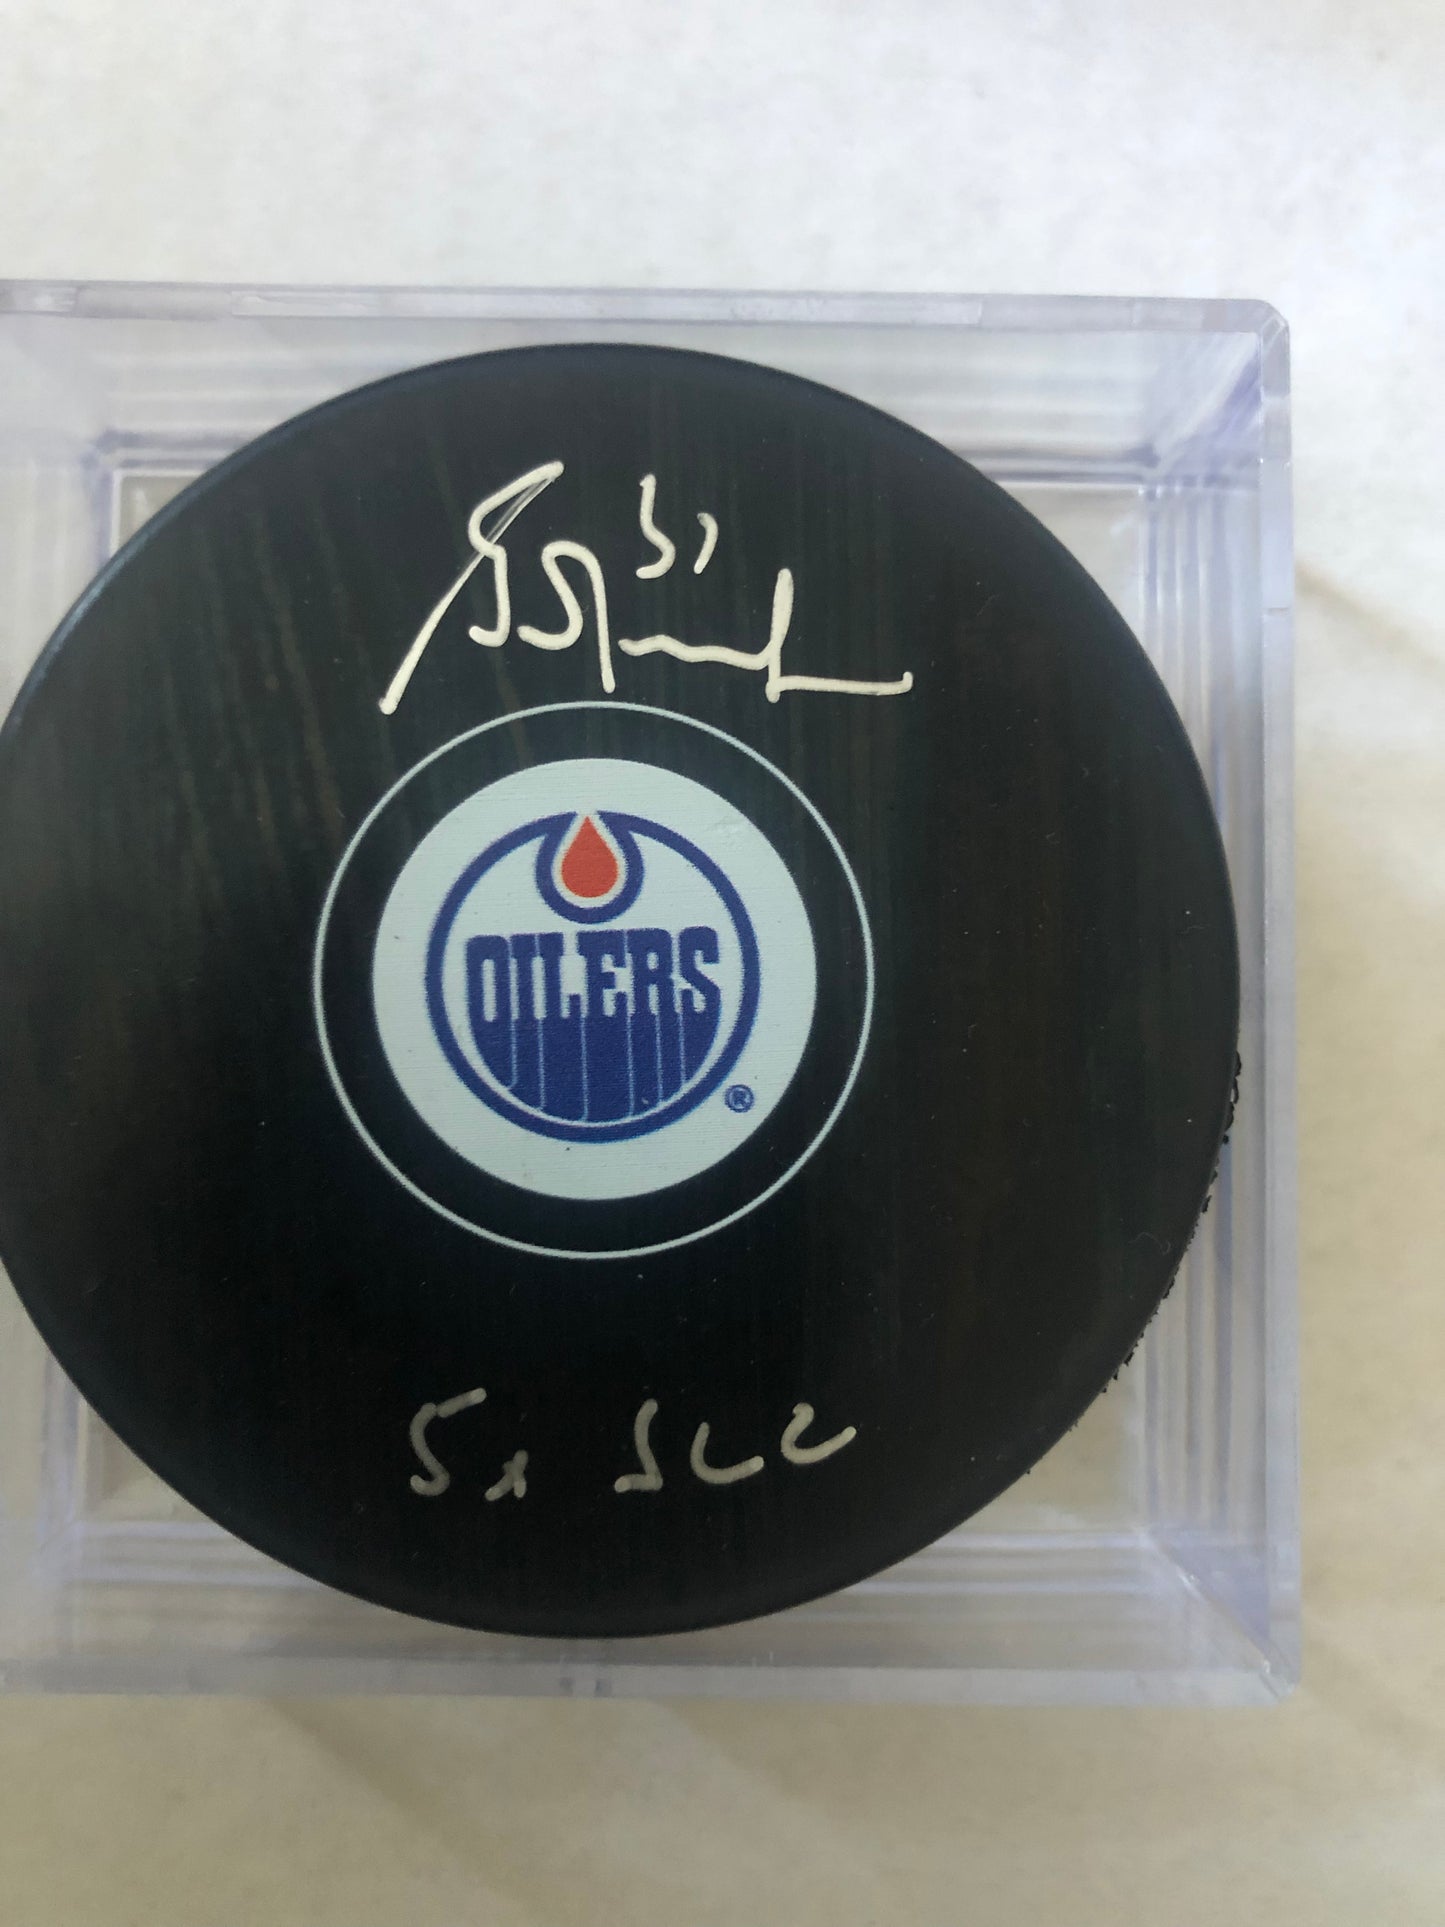 Bruins Gerry Cheevers signed puck w/HOF 85 inscription    Cheevers hologram